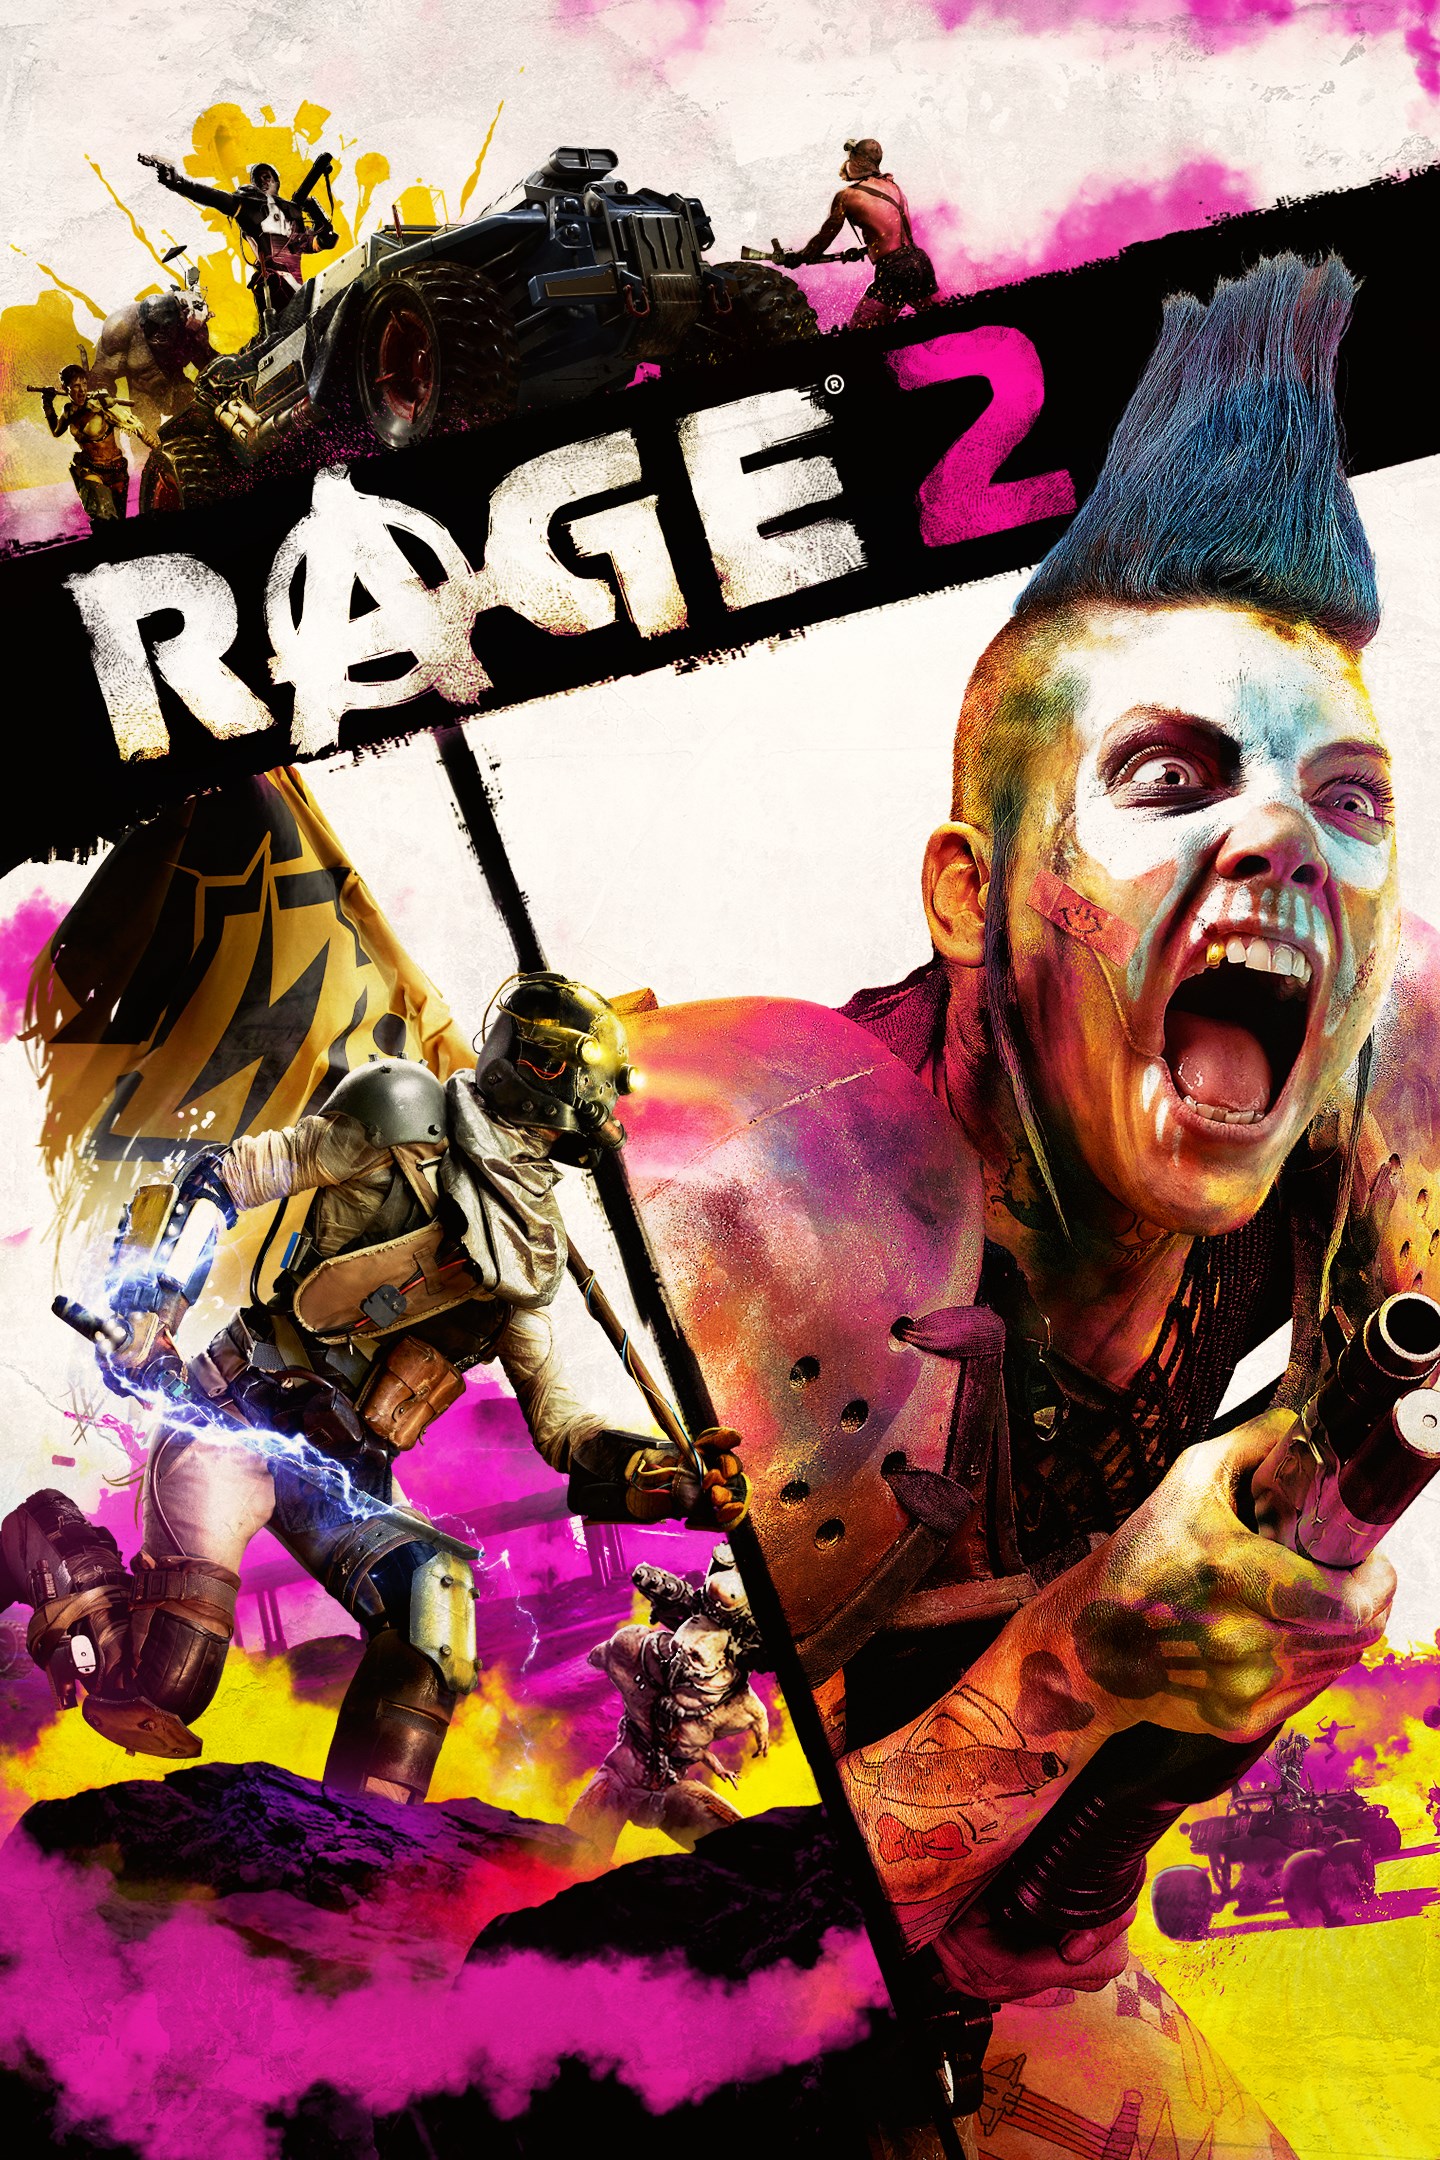 panel Therapy Laugh Play RAGE 2 | Xbox Cloud Gaming (Beta) on Xbox.com